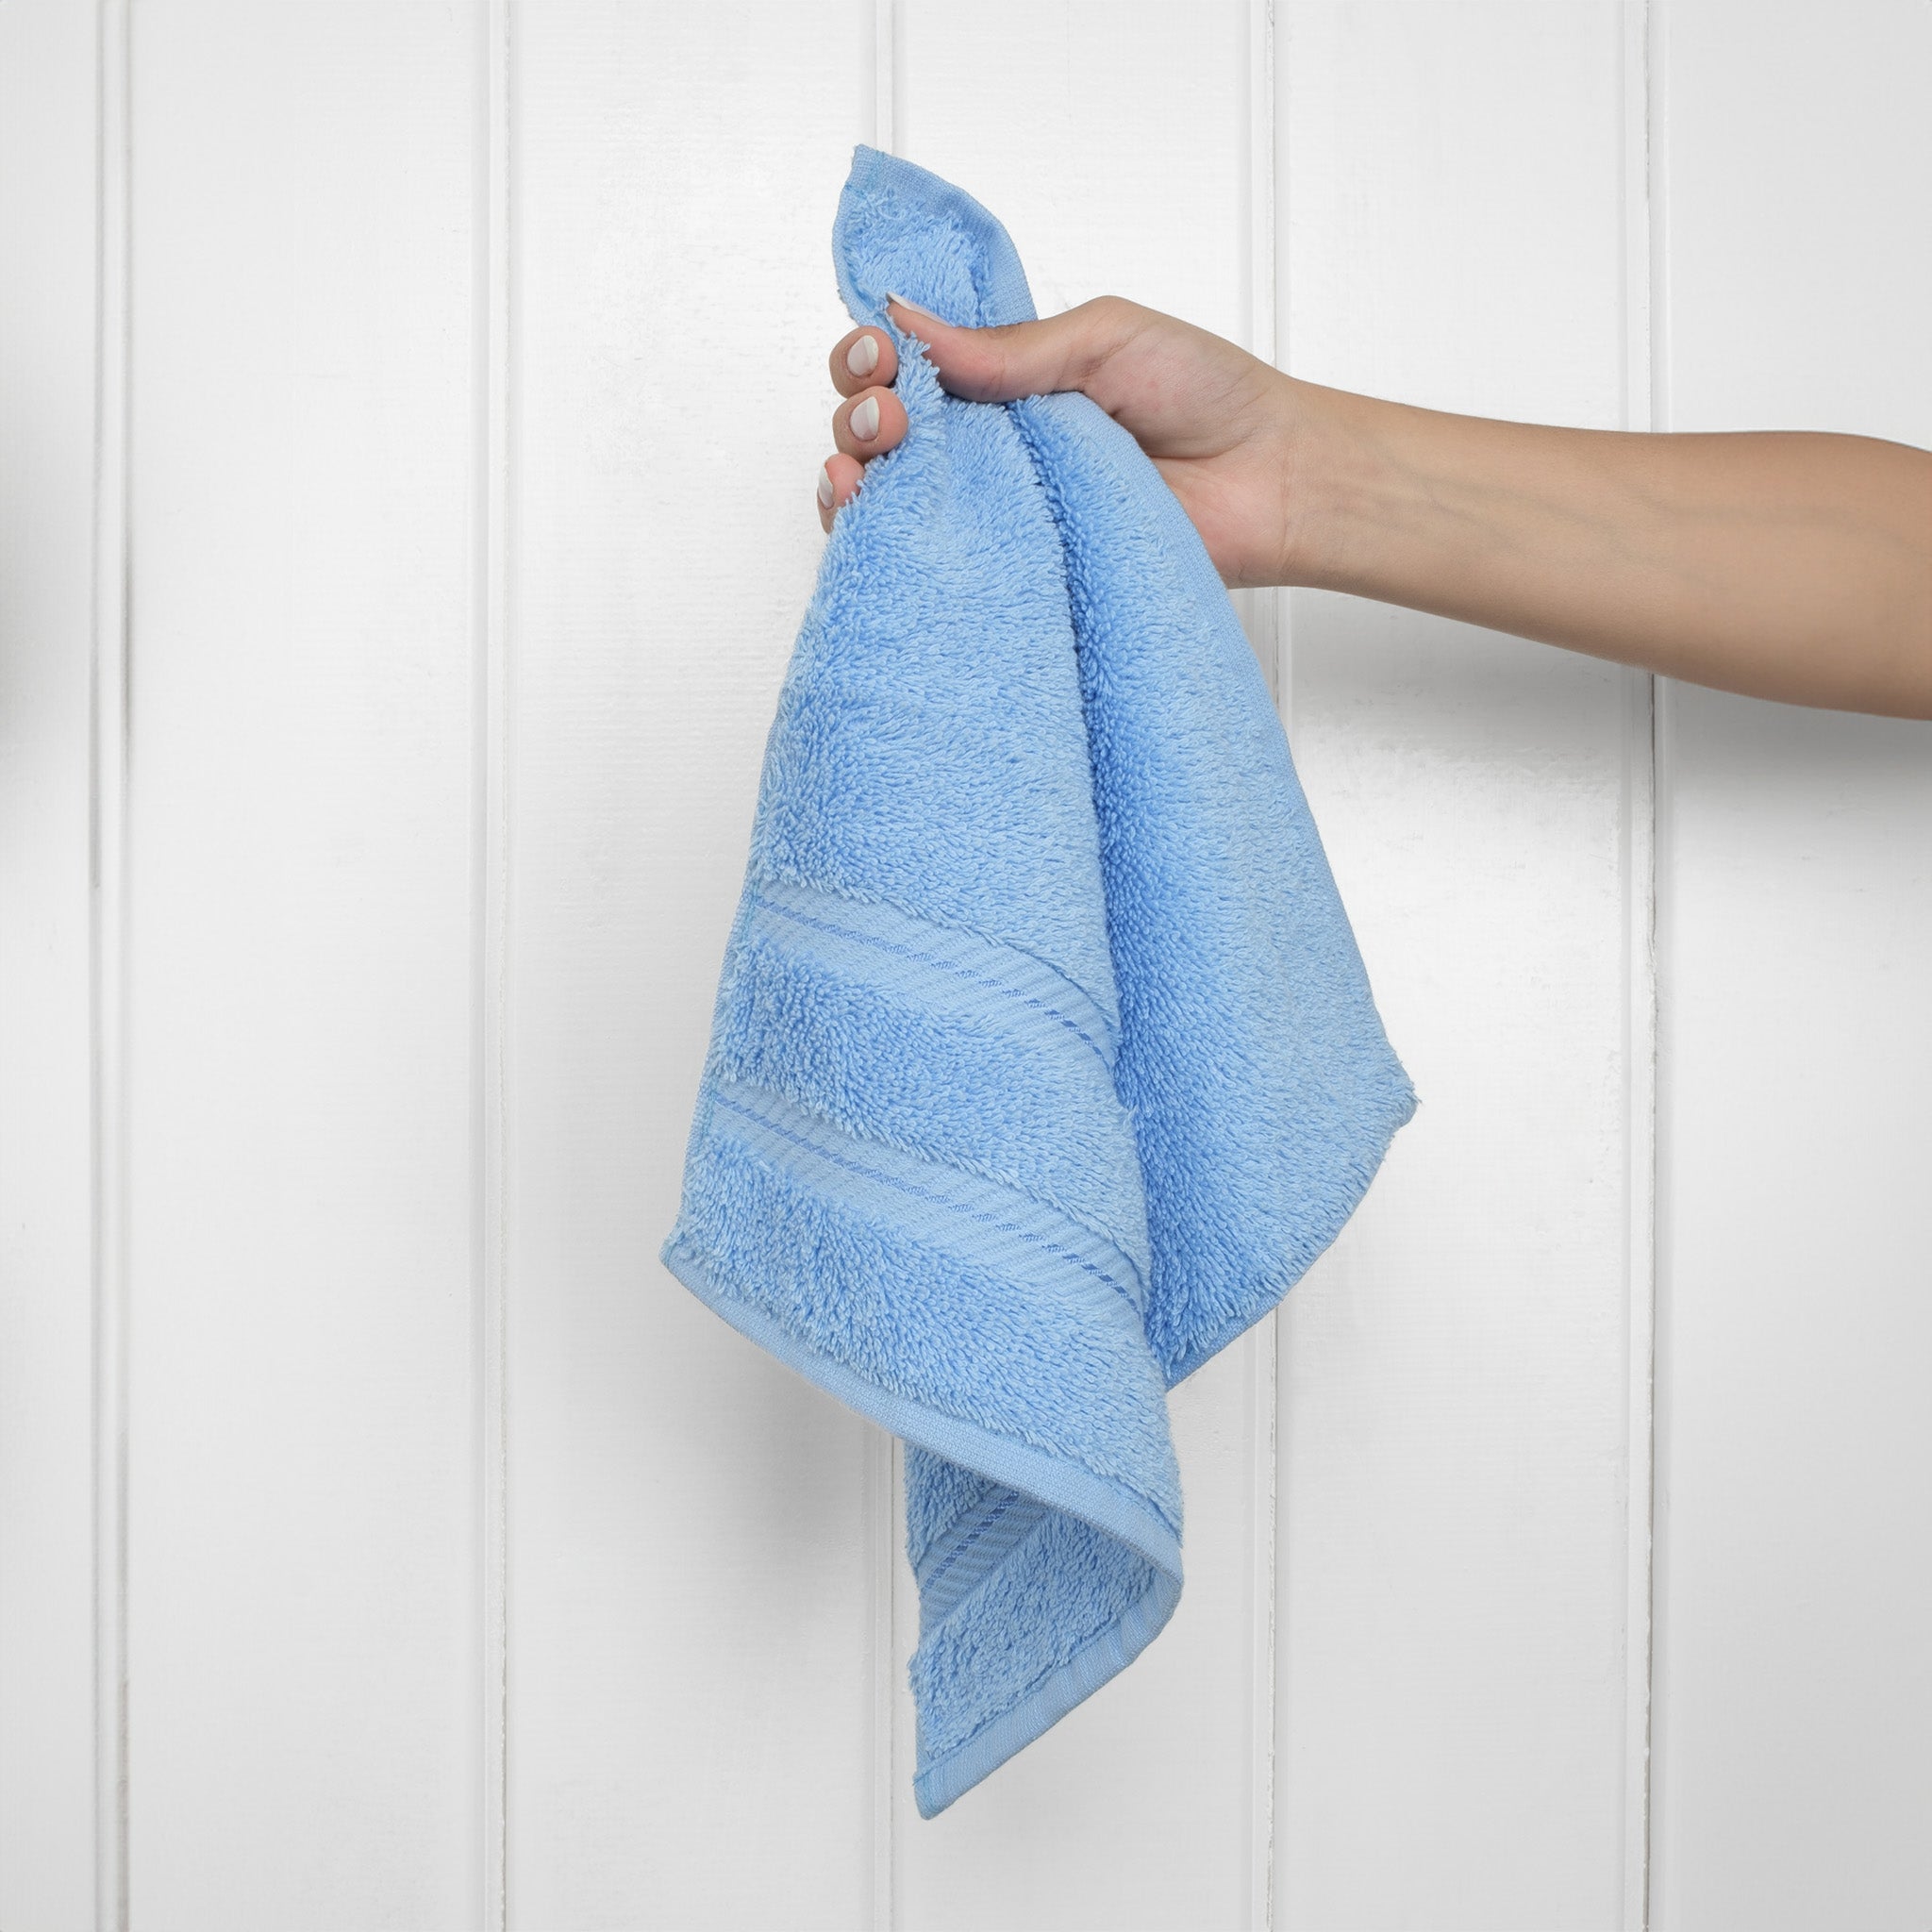 American Soft Linen 4 Pack Washcloth Set, 100% Cotton Washcloth Hand Face  Towels For Bathroom And Kitchen, Sky Blue : Target